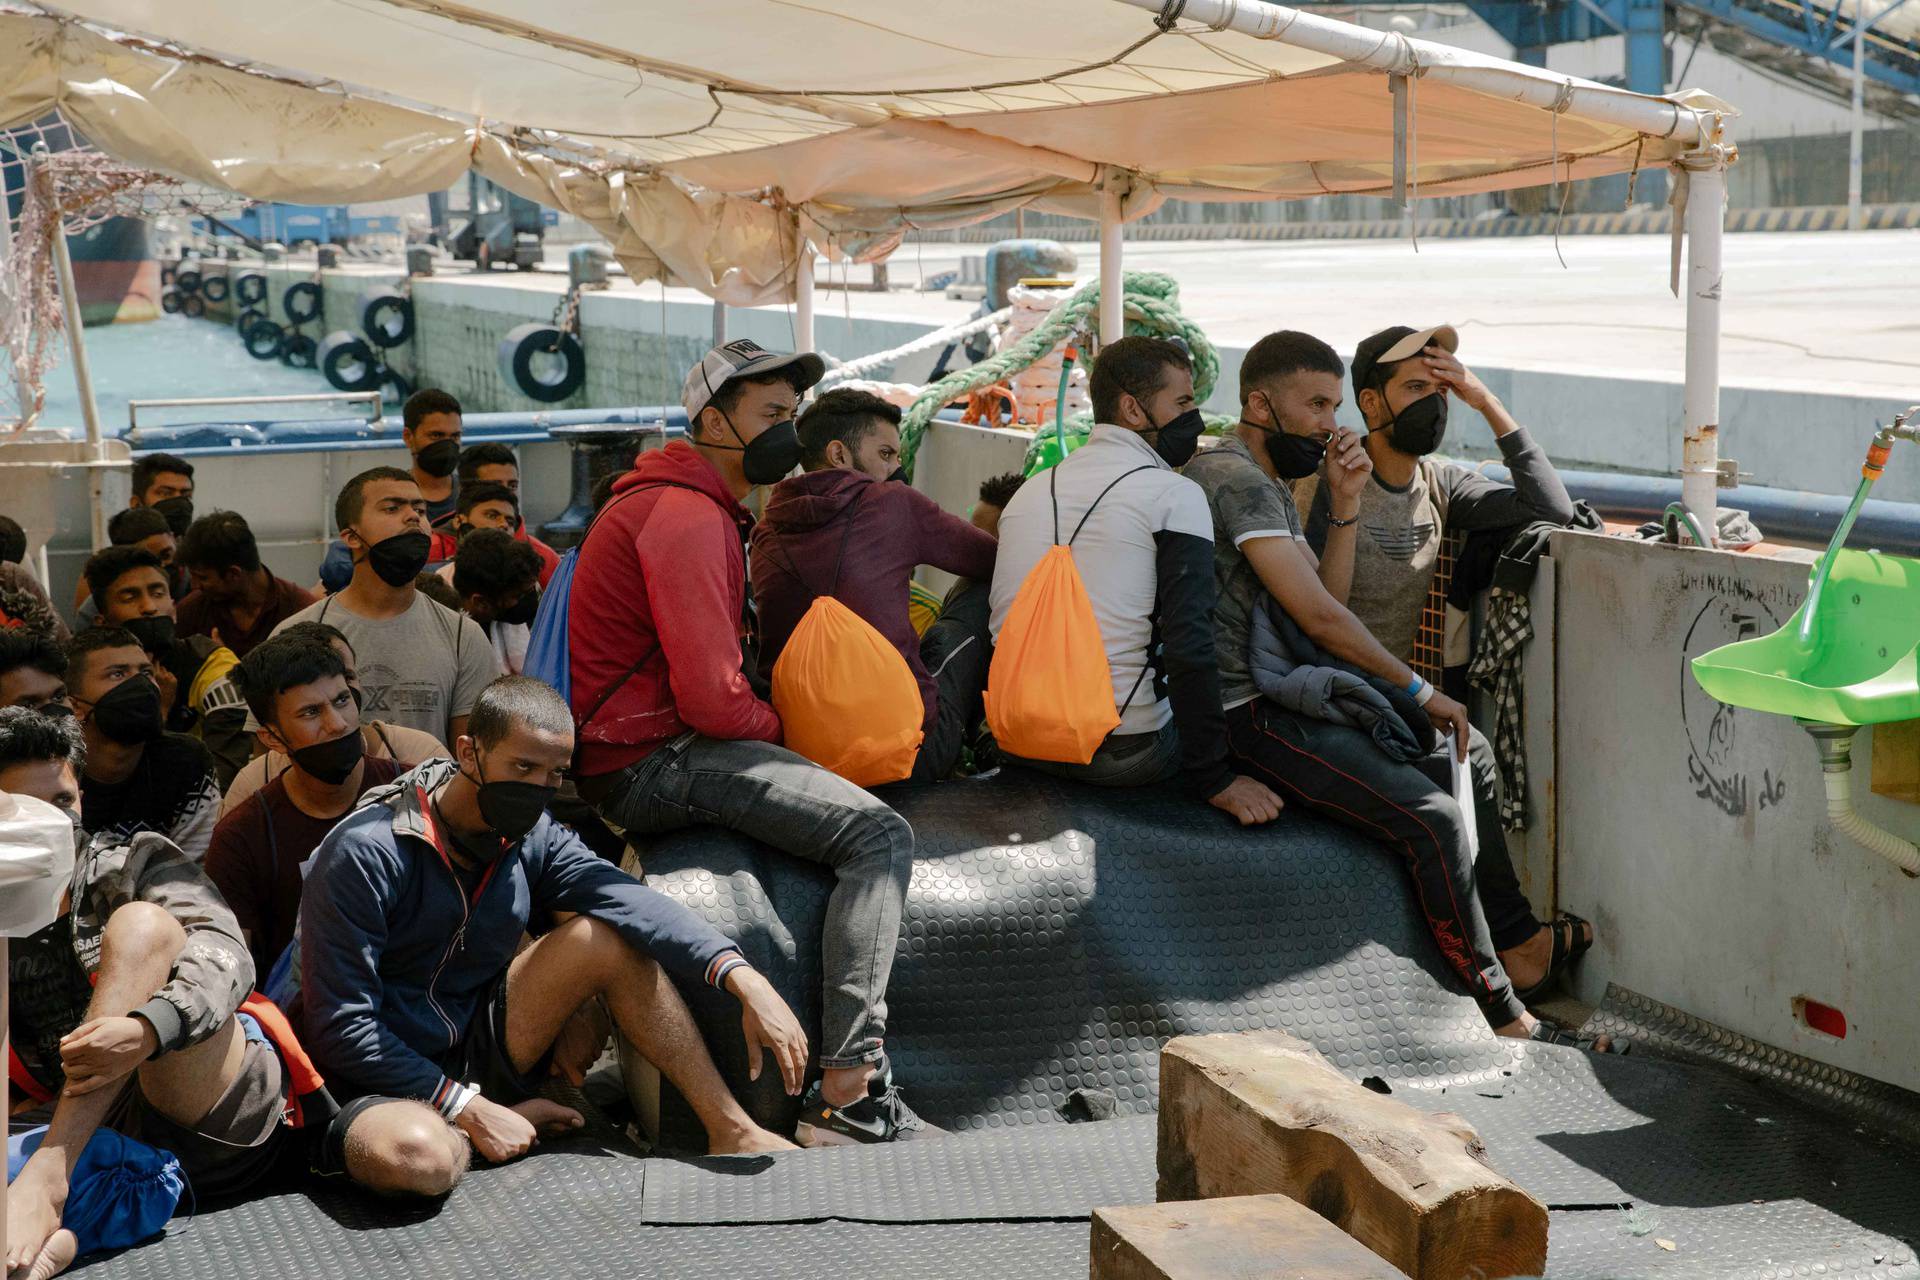 German NGO search and rescue ship Sea-Watch 3 arrives in Sicily with rescued migrants on board